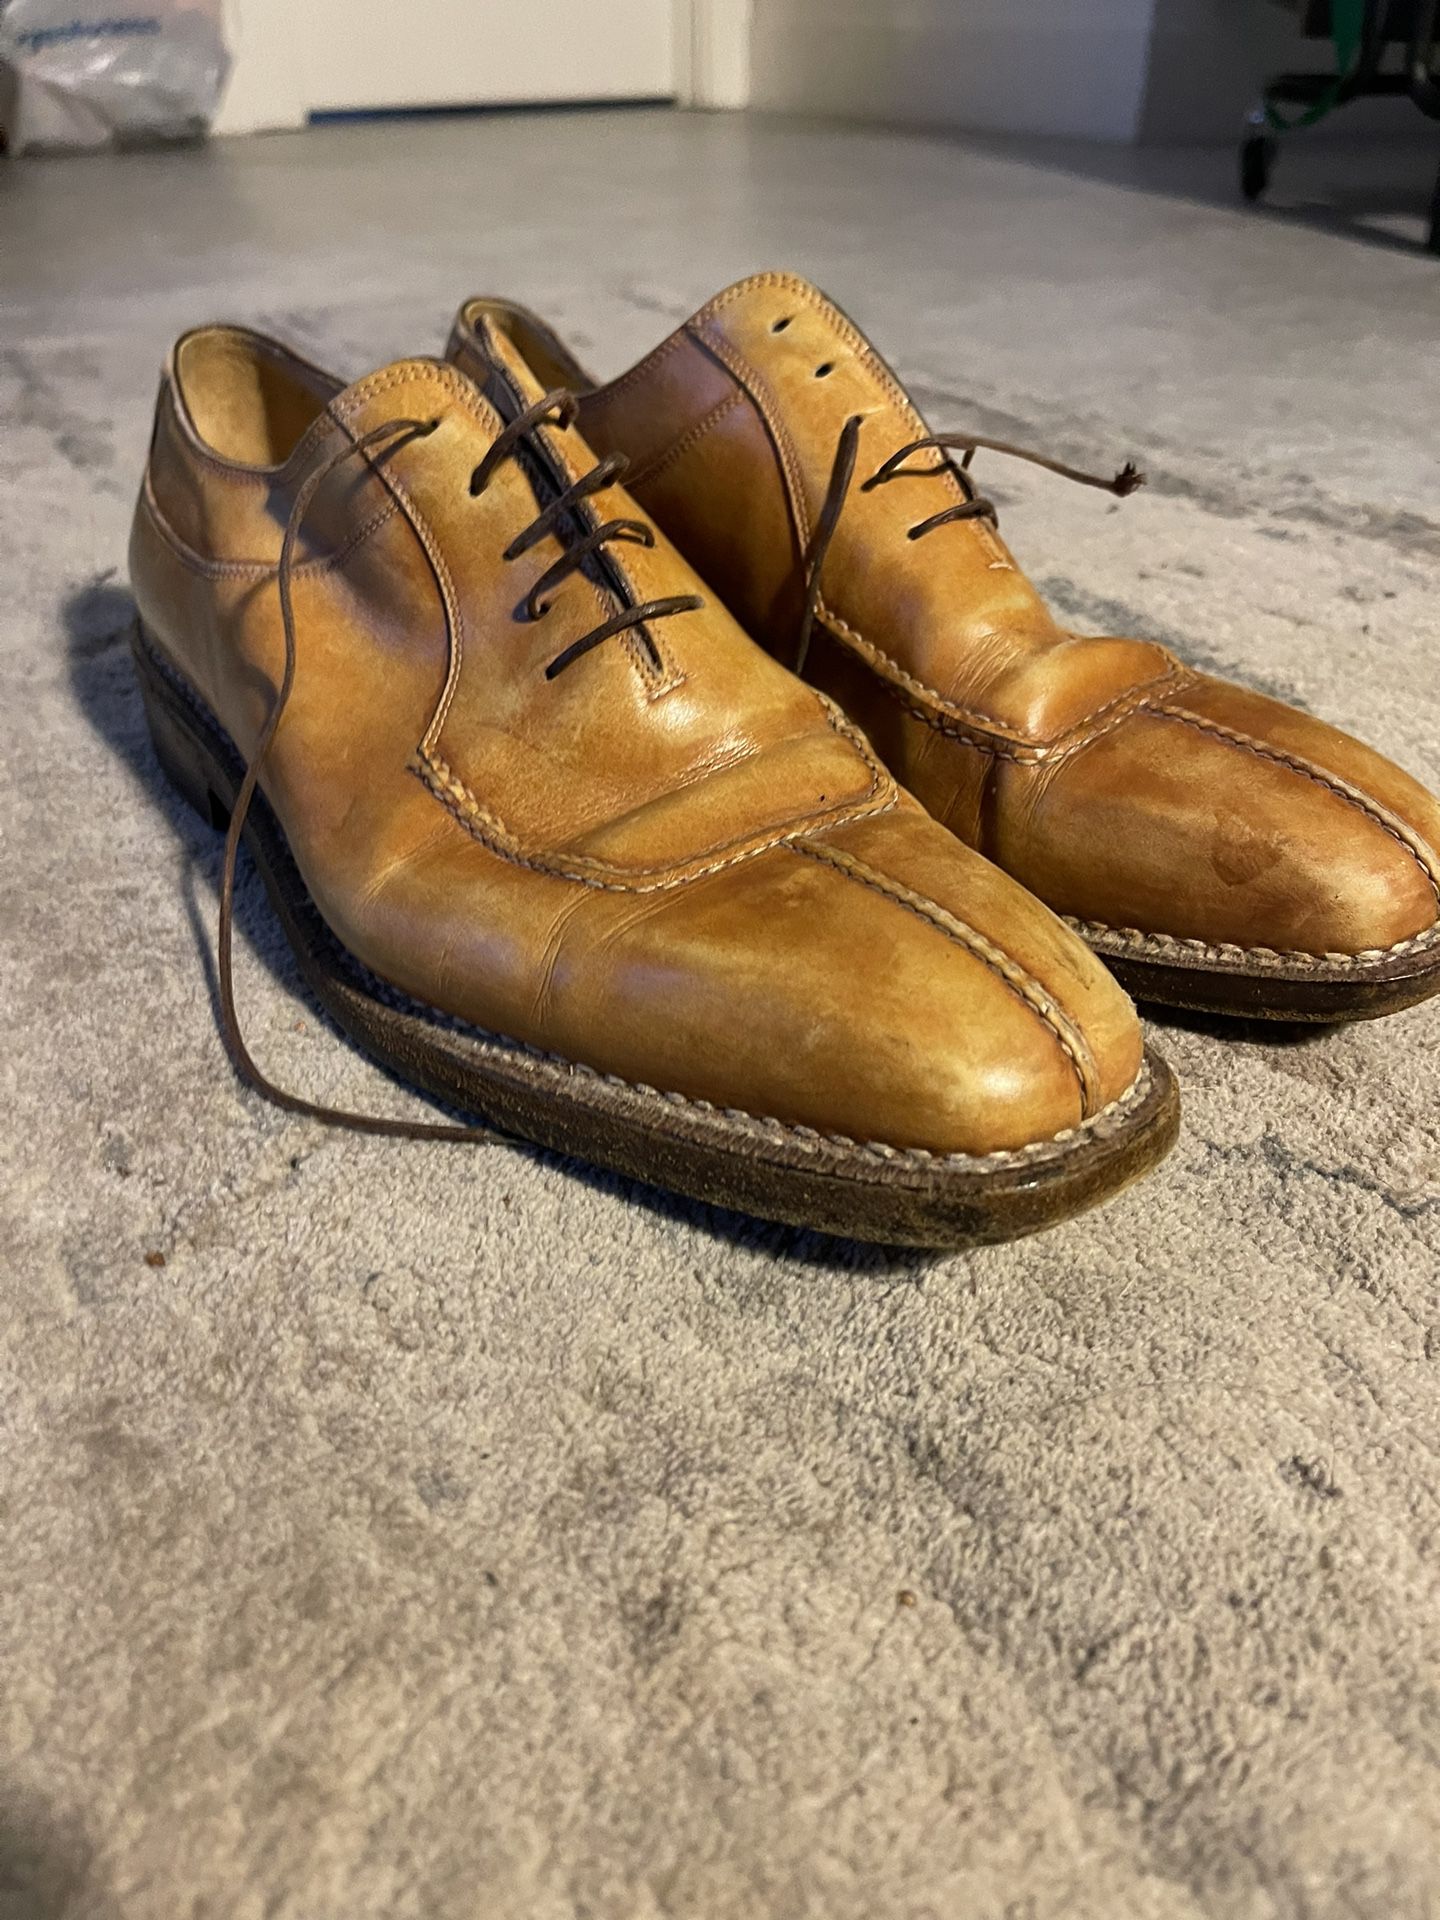 Italian Leather Dress Shoes In Insane Condition